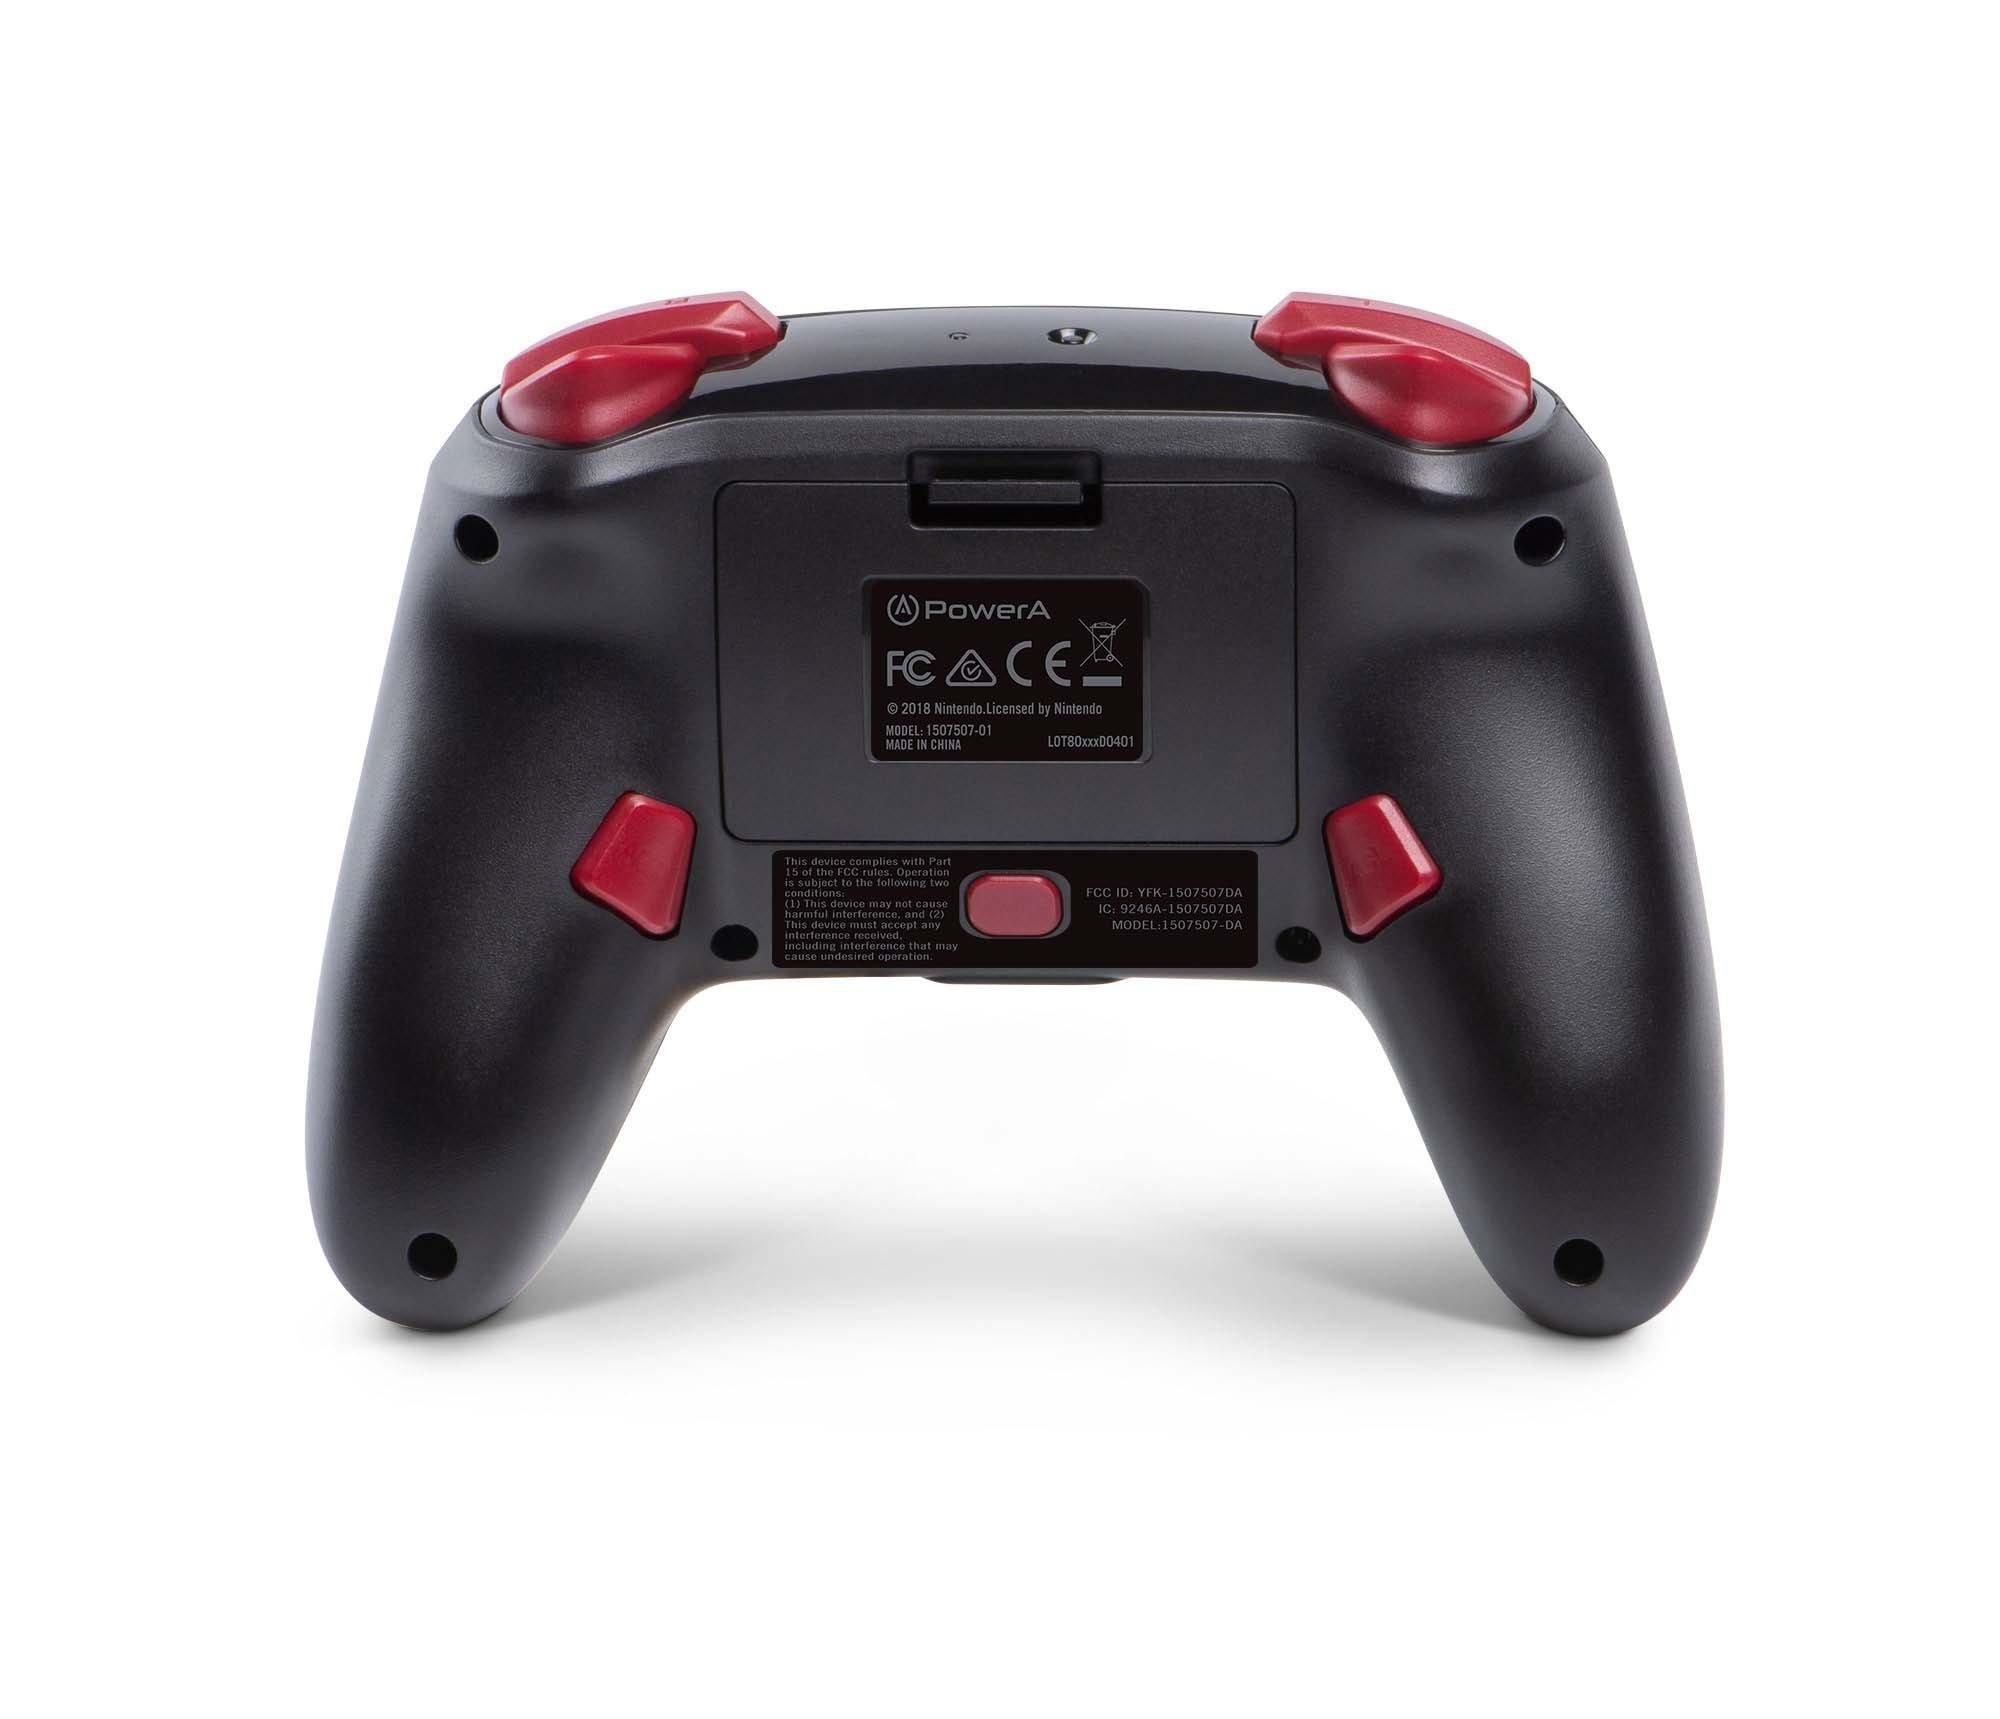 Diablo III Enhanced Wireless Controller for Nintendo Switch Only at GameStop